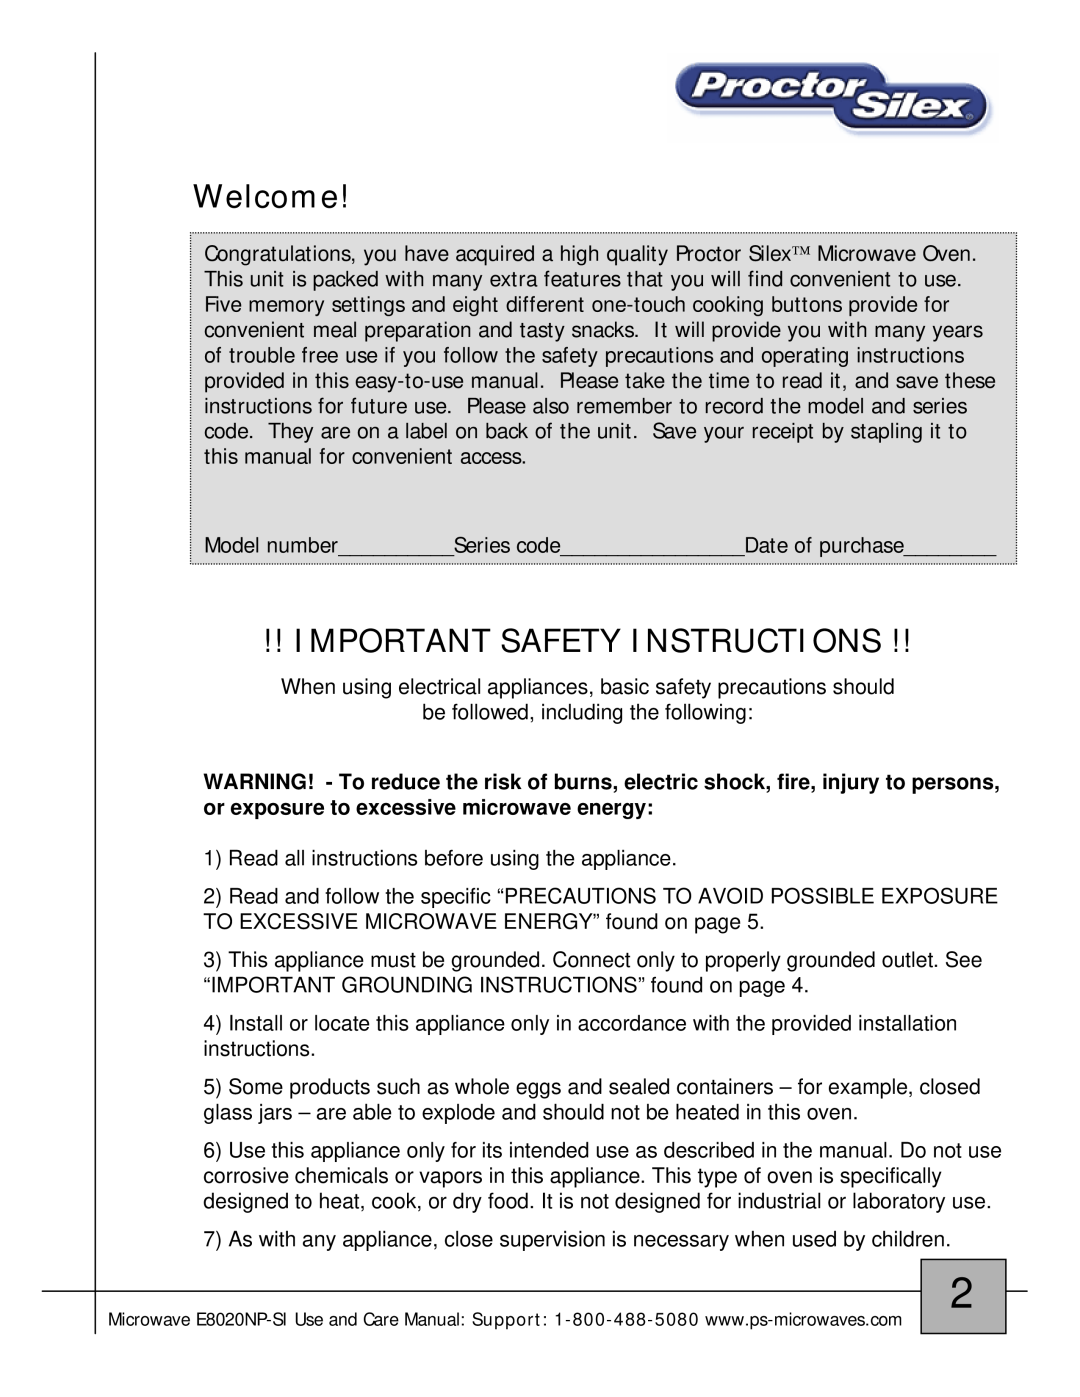 Proctor-Silex E8020NP-SI owner manual Welcome, Important Safety Instructions 